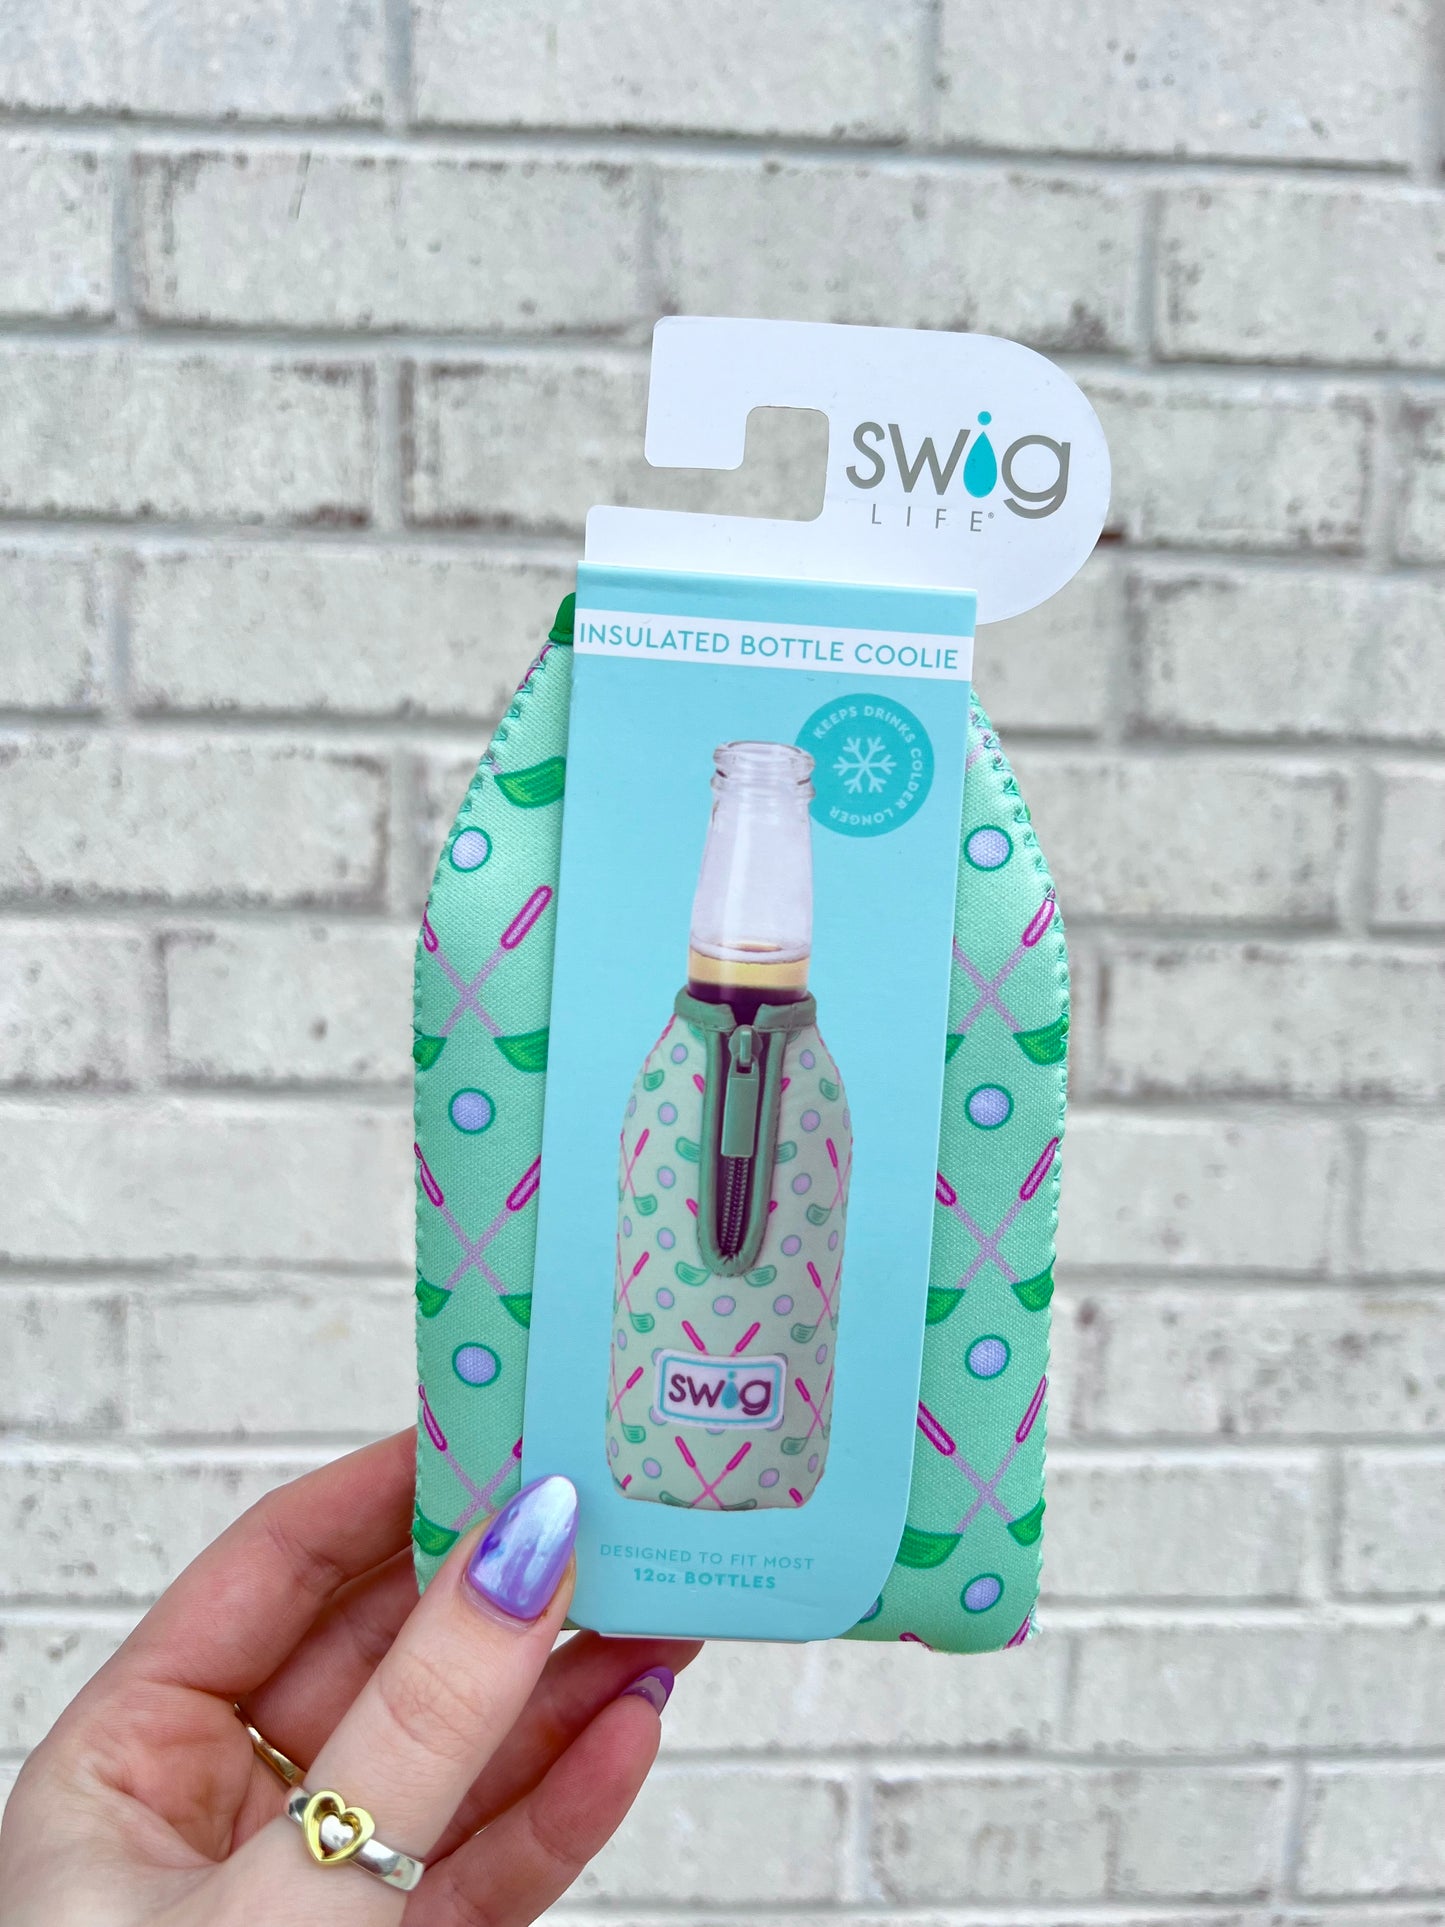 Swig Insulated 12oz Bottle Coolie